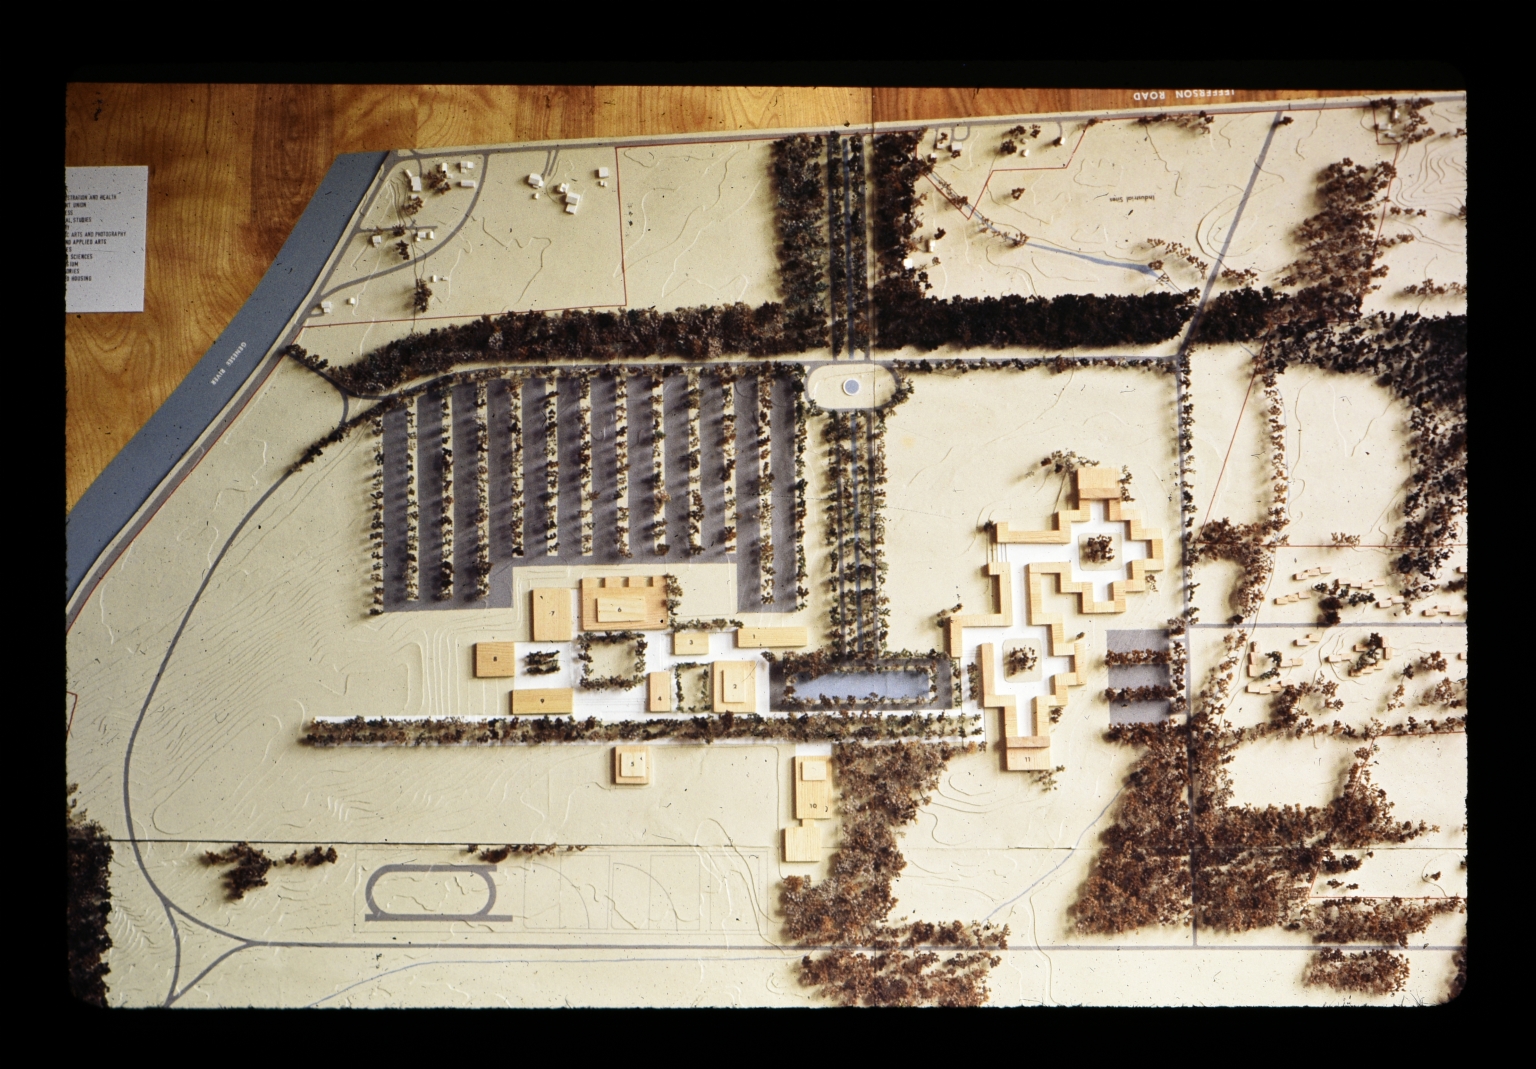 Wall model of proposed Henrietta campus